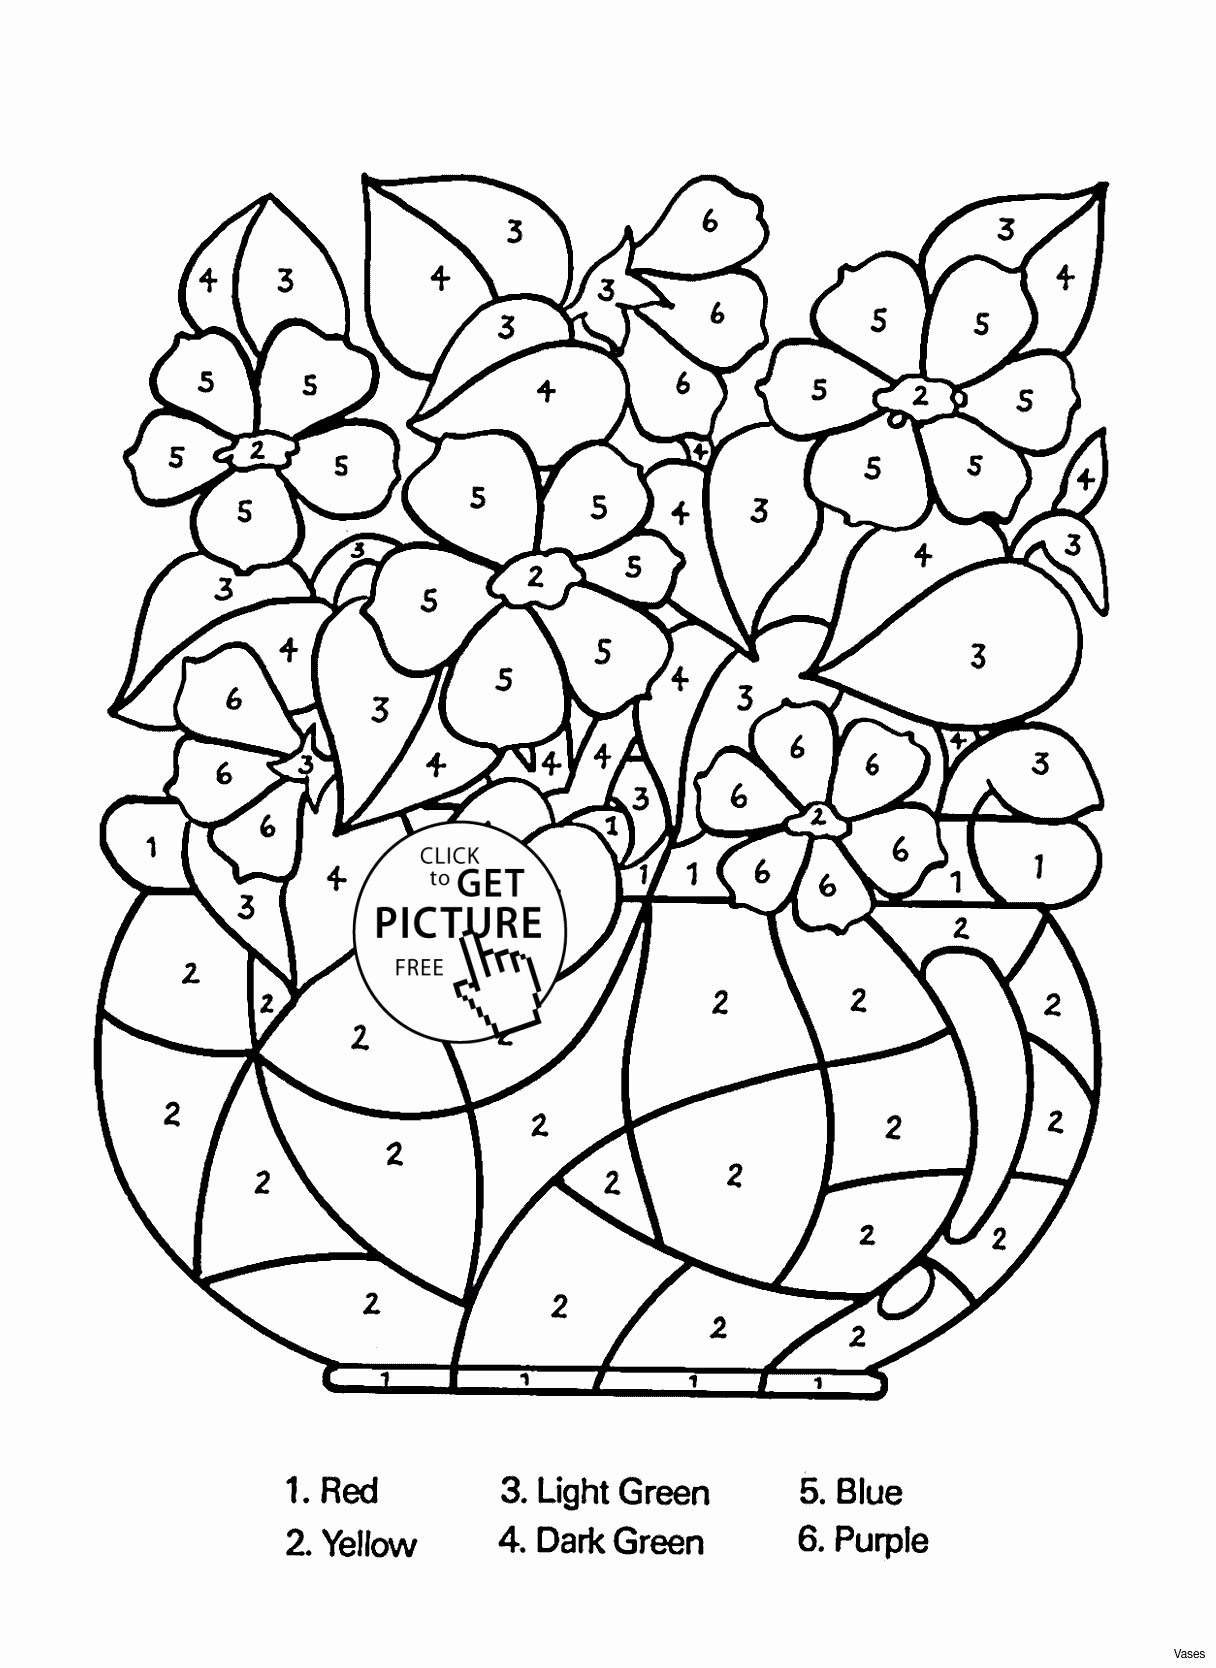 28 Awesome Short Glass Cylinder Vases 2022 free download short glass cylinder vases of 5 cylinder vase photograph small glass shower awesome glass bottle for 5 cylinder vase photograph vases flower vase coloring page pages flowers in a top i 0d